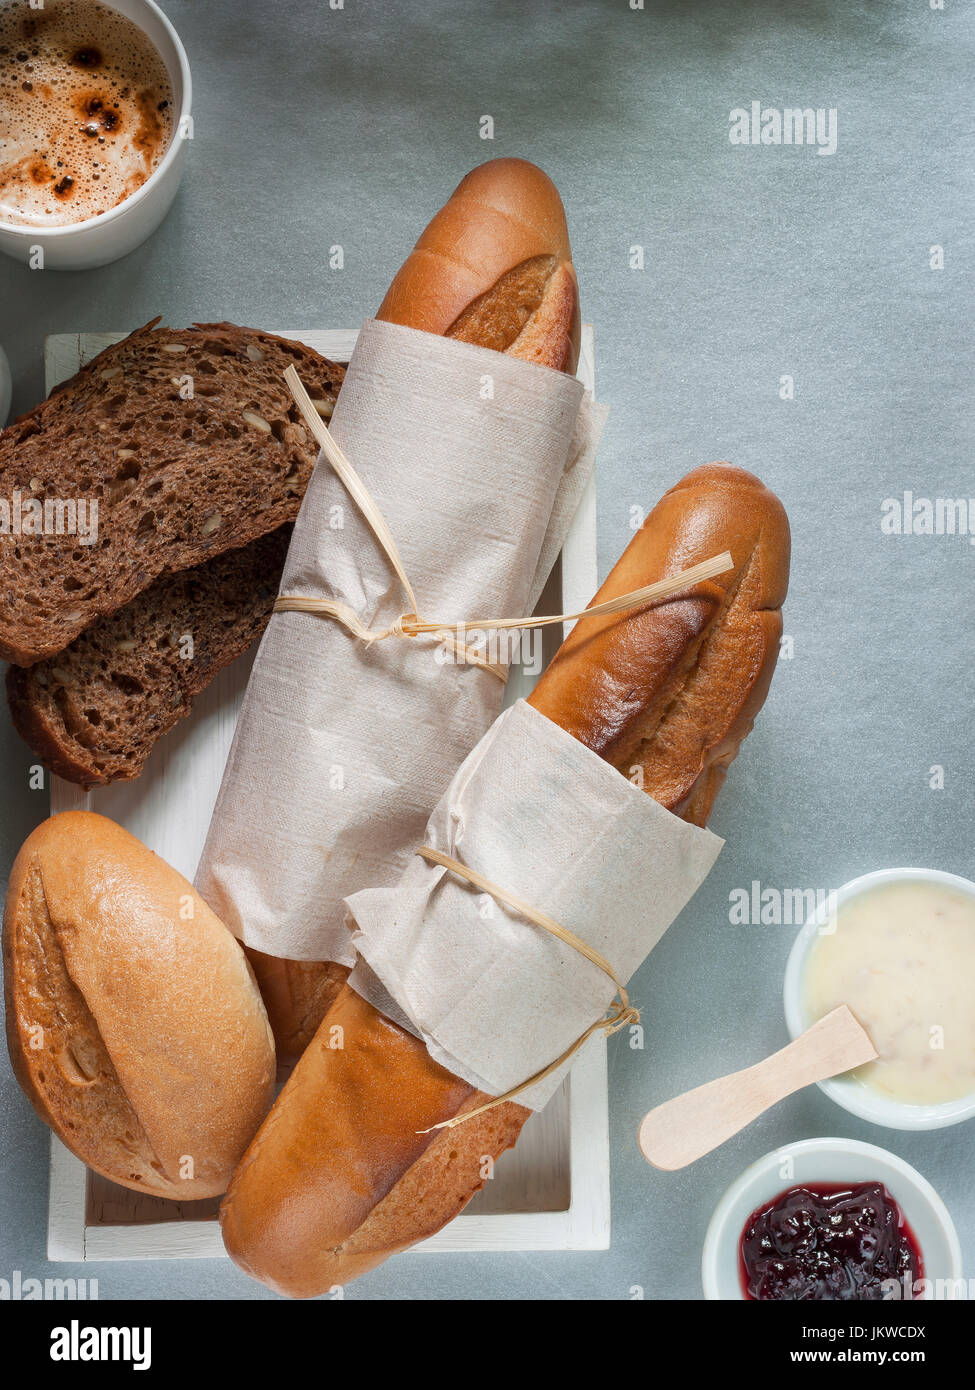 bakery cereal bread home made fresh for everyday breakfast or coffee time healthy life style food Stock Photo